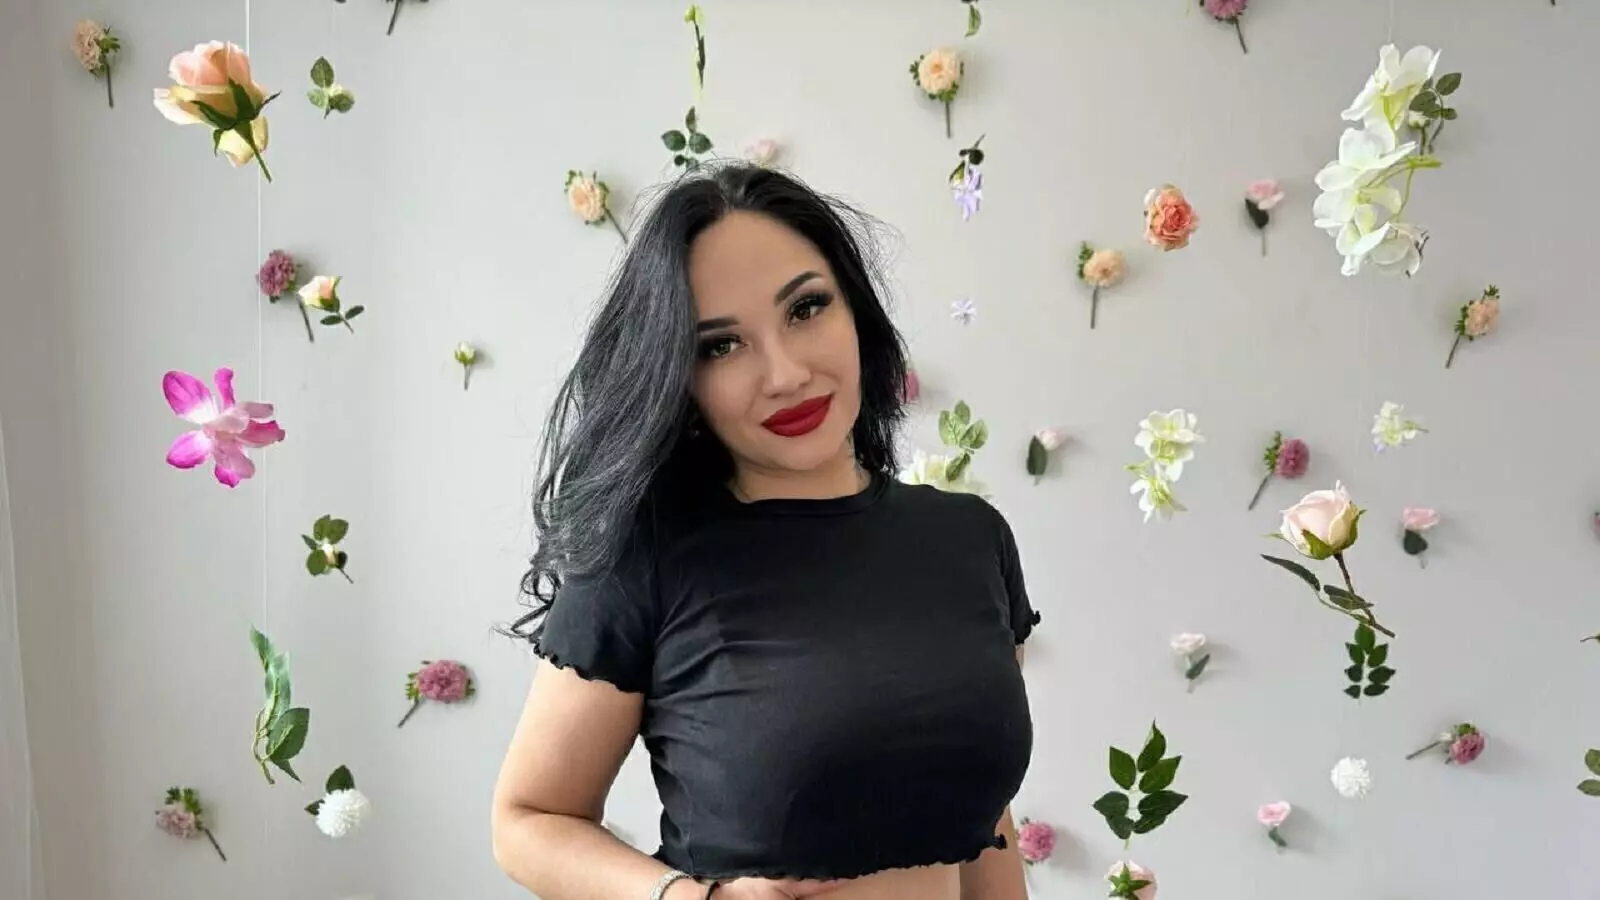 RianaBlum's Live Nude Chat